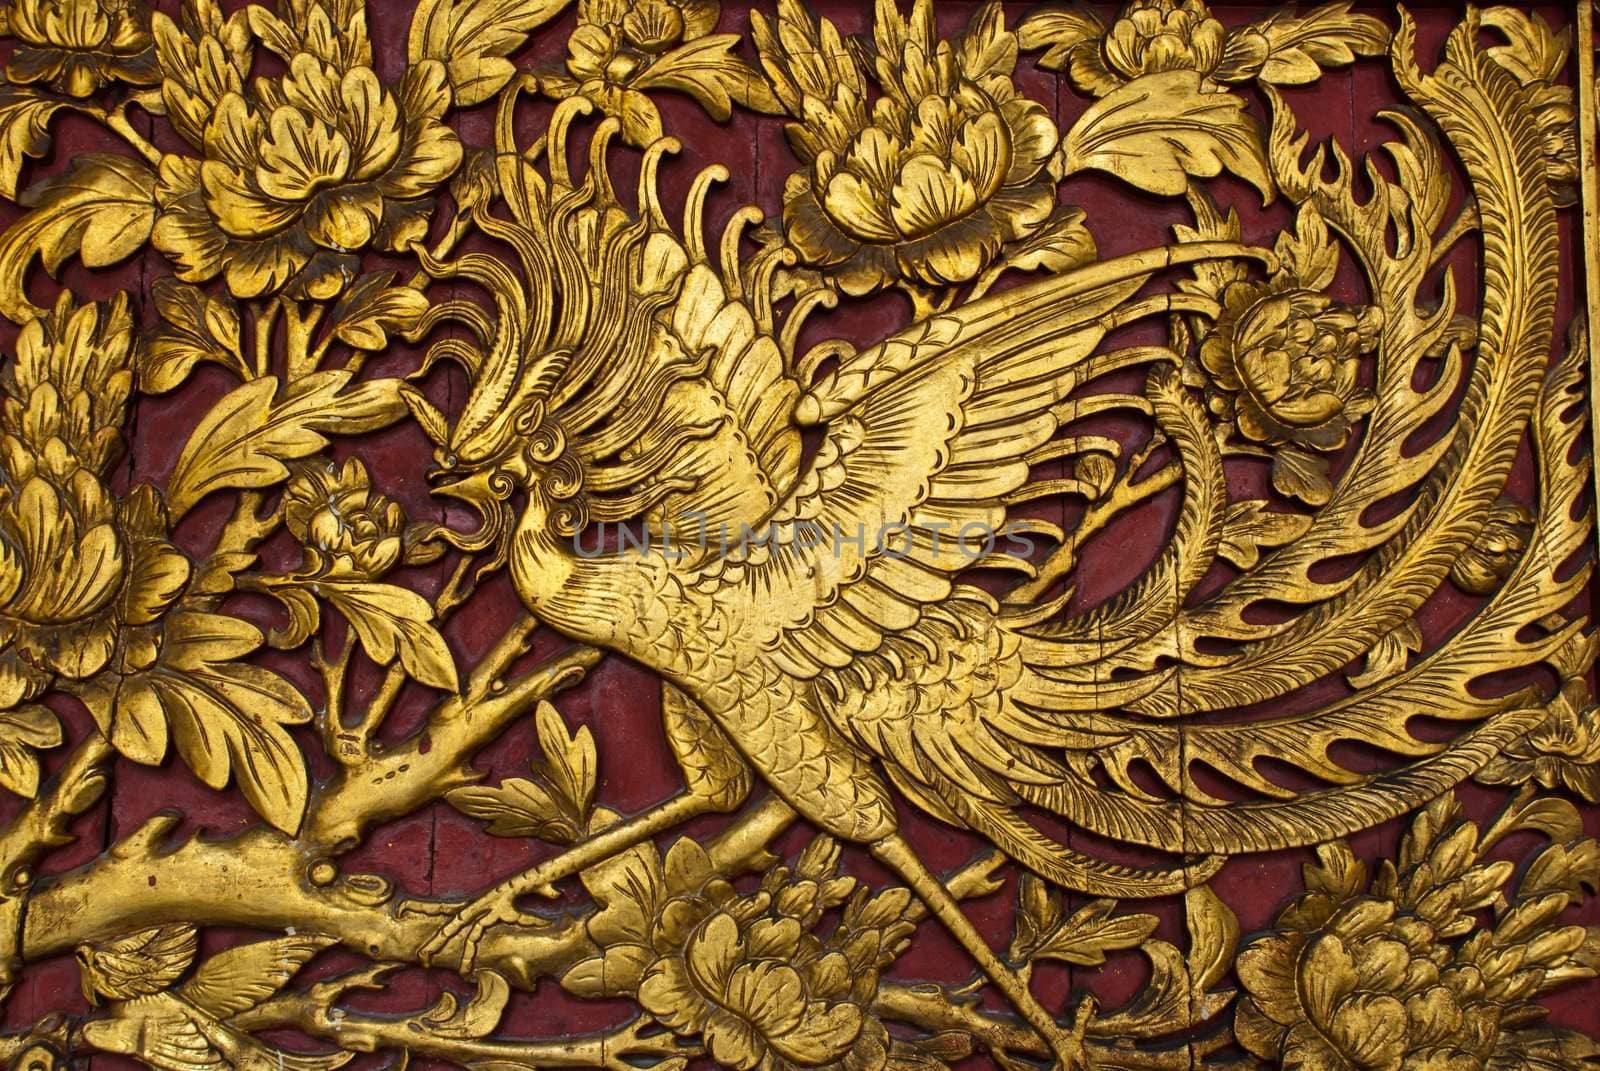 Old phenix golden plate, can be use for background, religion, life, and vilitality concepts
